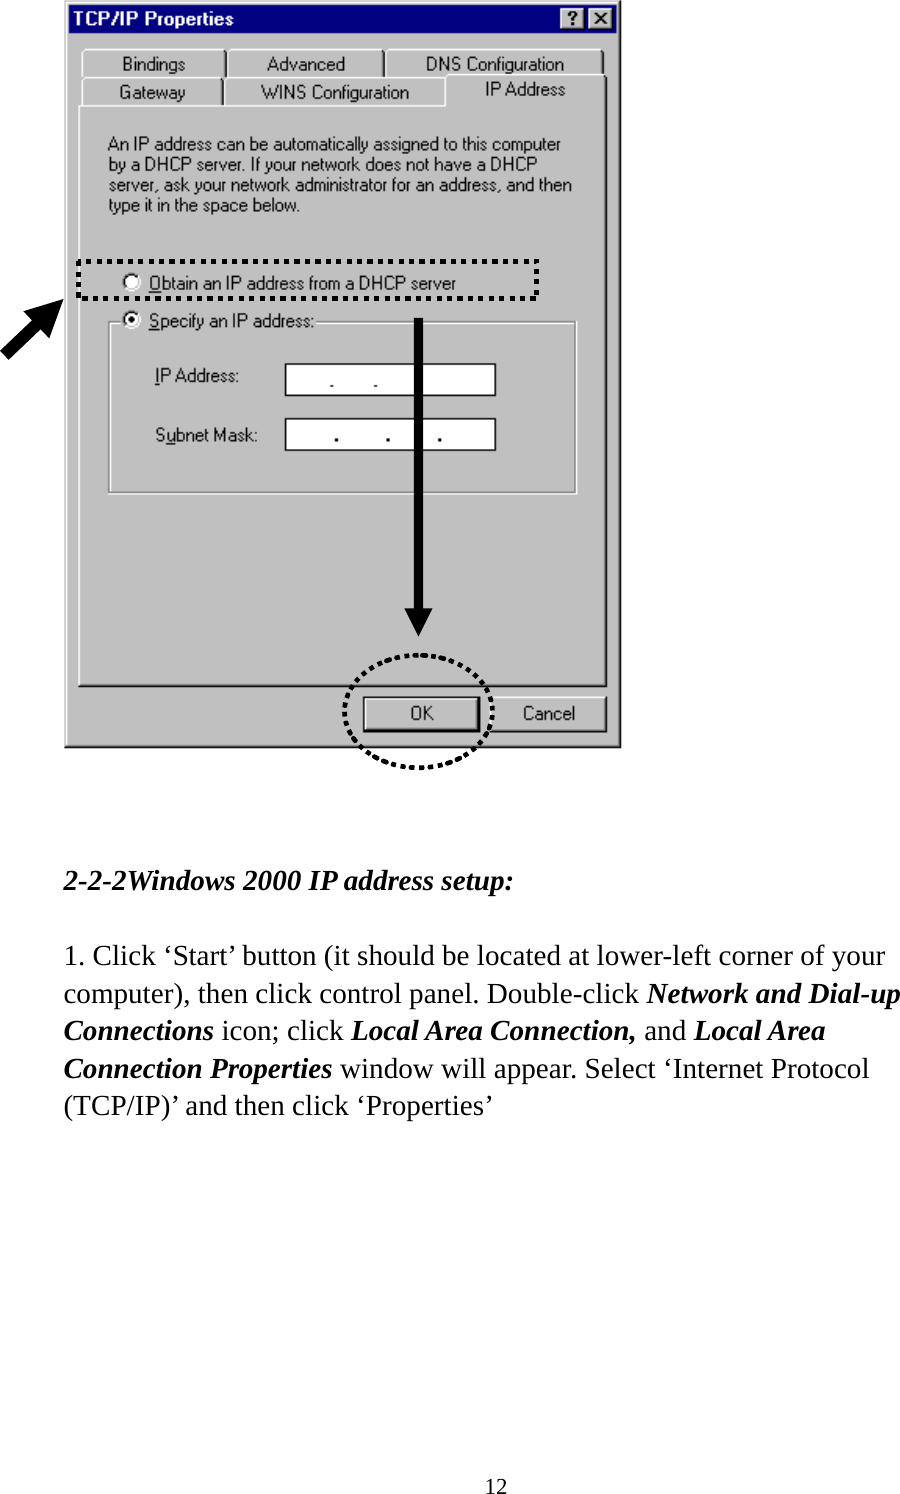 12     2-2-2Windows 2000 IP address setup:  1. Click ‘Start’ button (it should be located at lower-left corner of your computer), then click control panel. Double-click Network and Dial-up Connections icon; click Local Area Connection, and Local Area Connection Properties window will appear. Select ‘Internet Protocol (TCP/IP)’ and then click ‘Properties’    